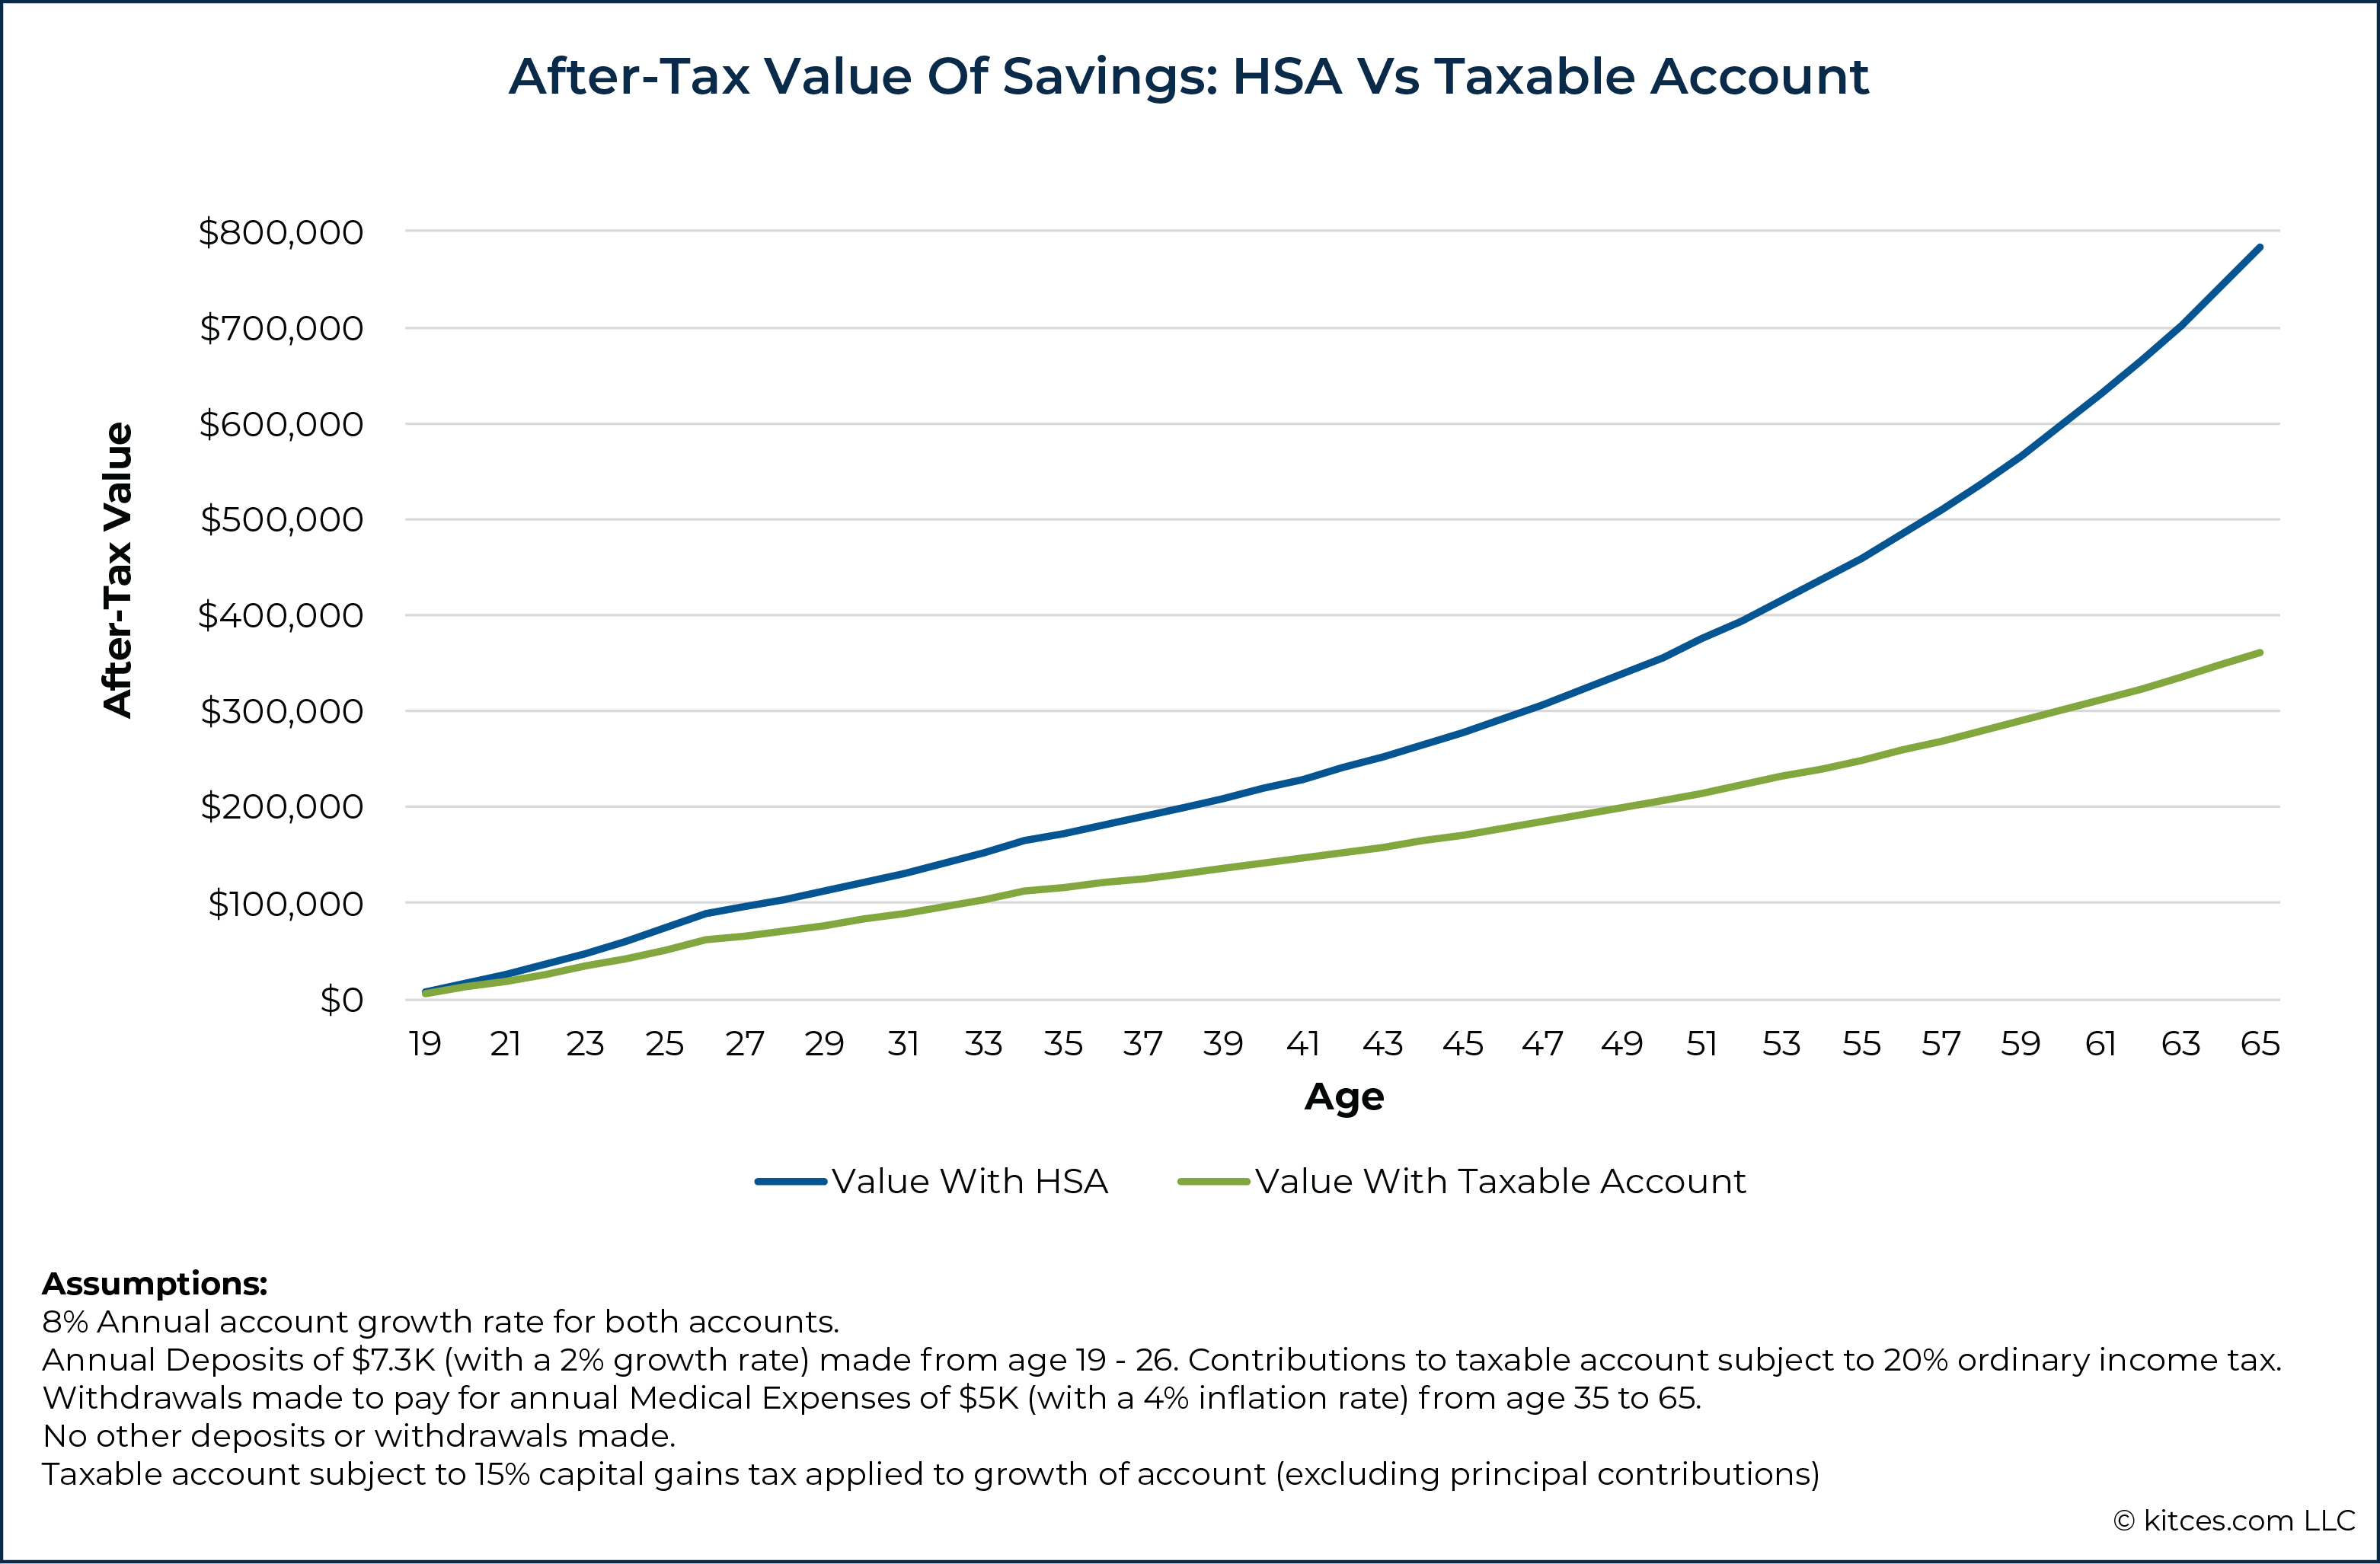 The HSA Triple Tax Advantage - What You Should Know - Debt-Free Doctor